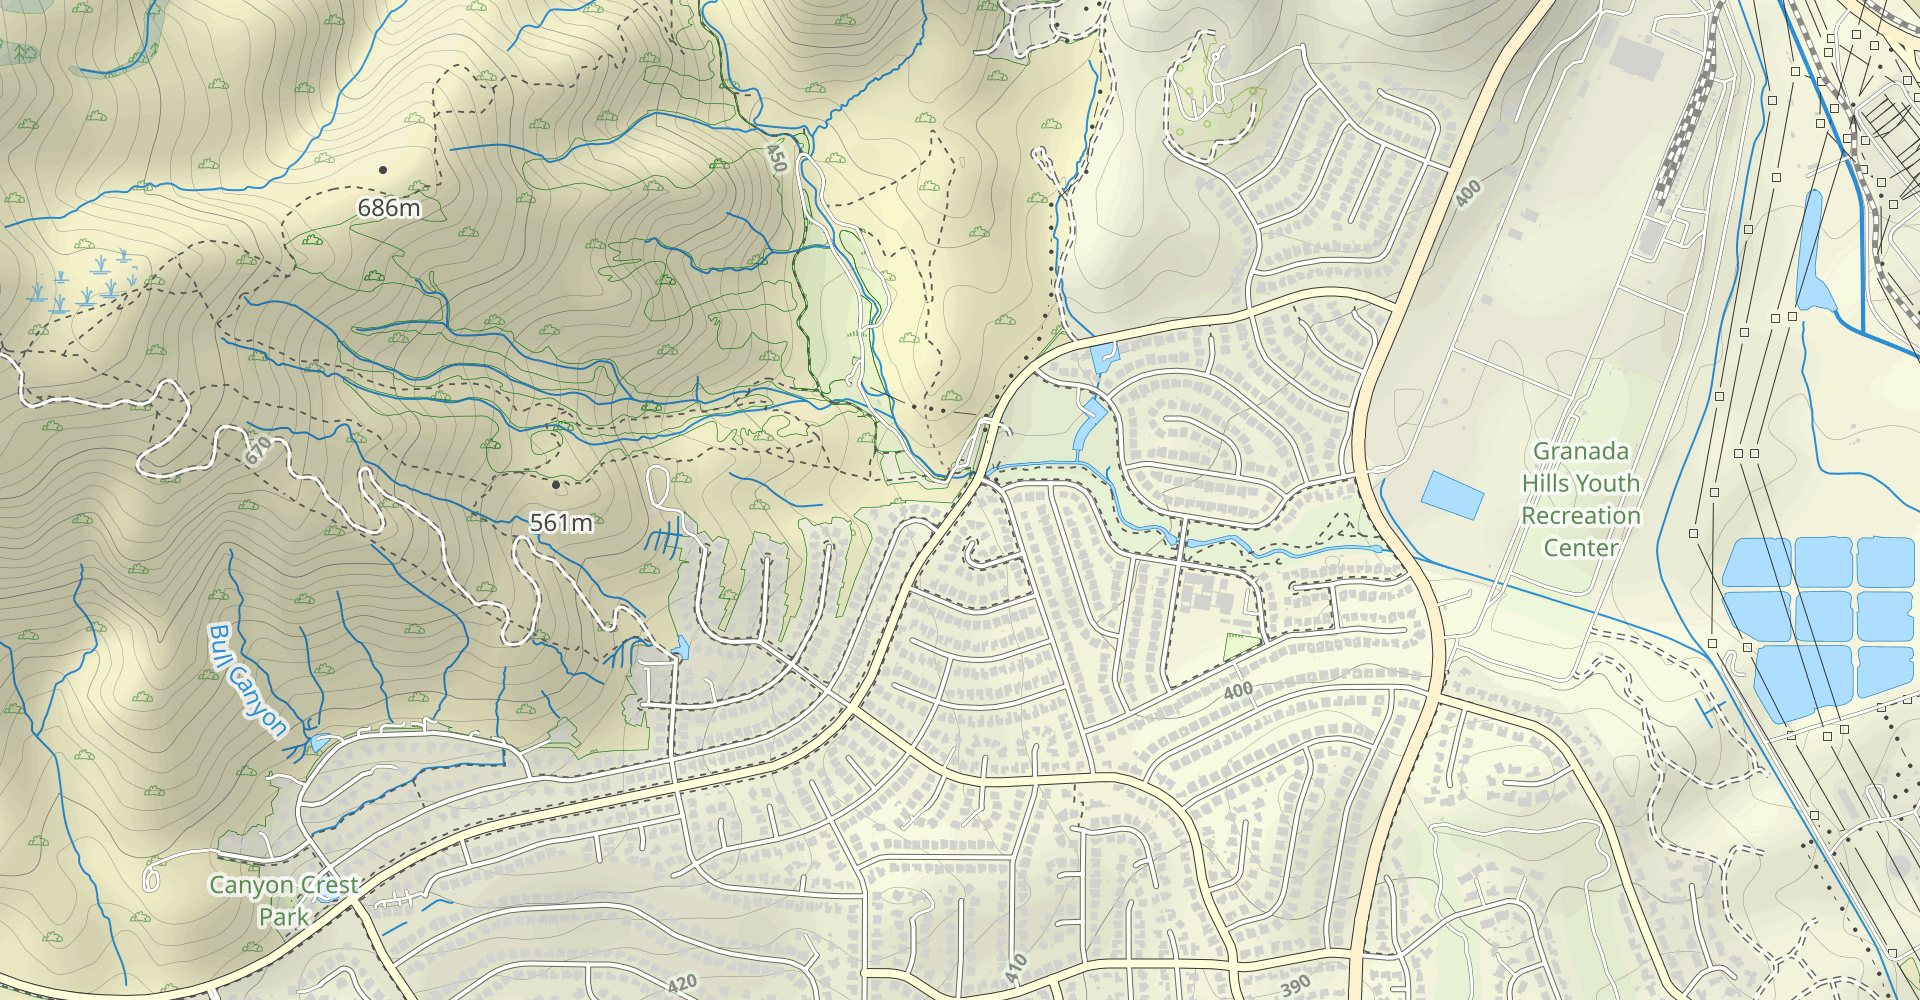 Mission Point via Bee Canyon and Decampos Trail Loop